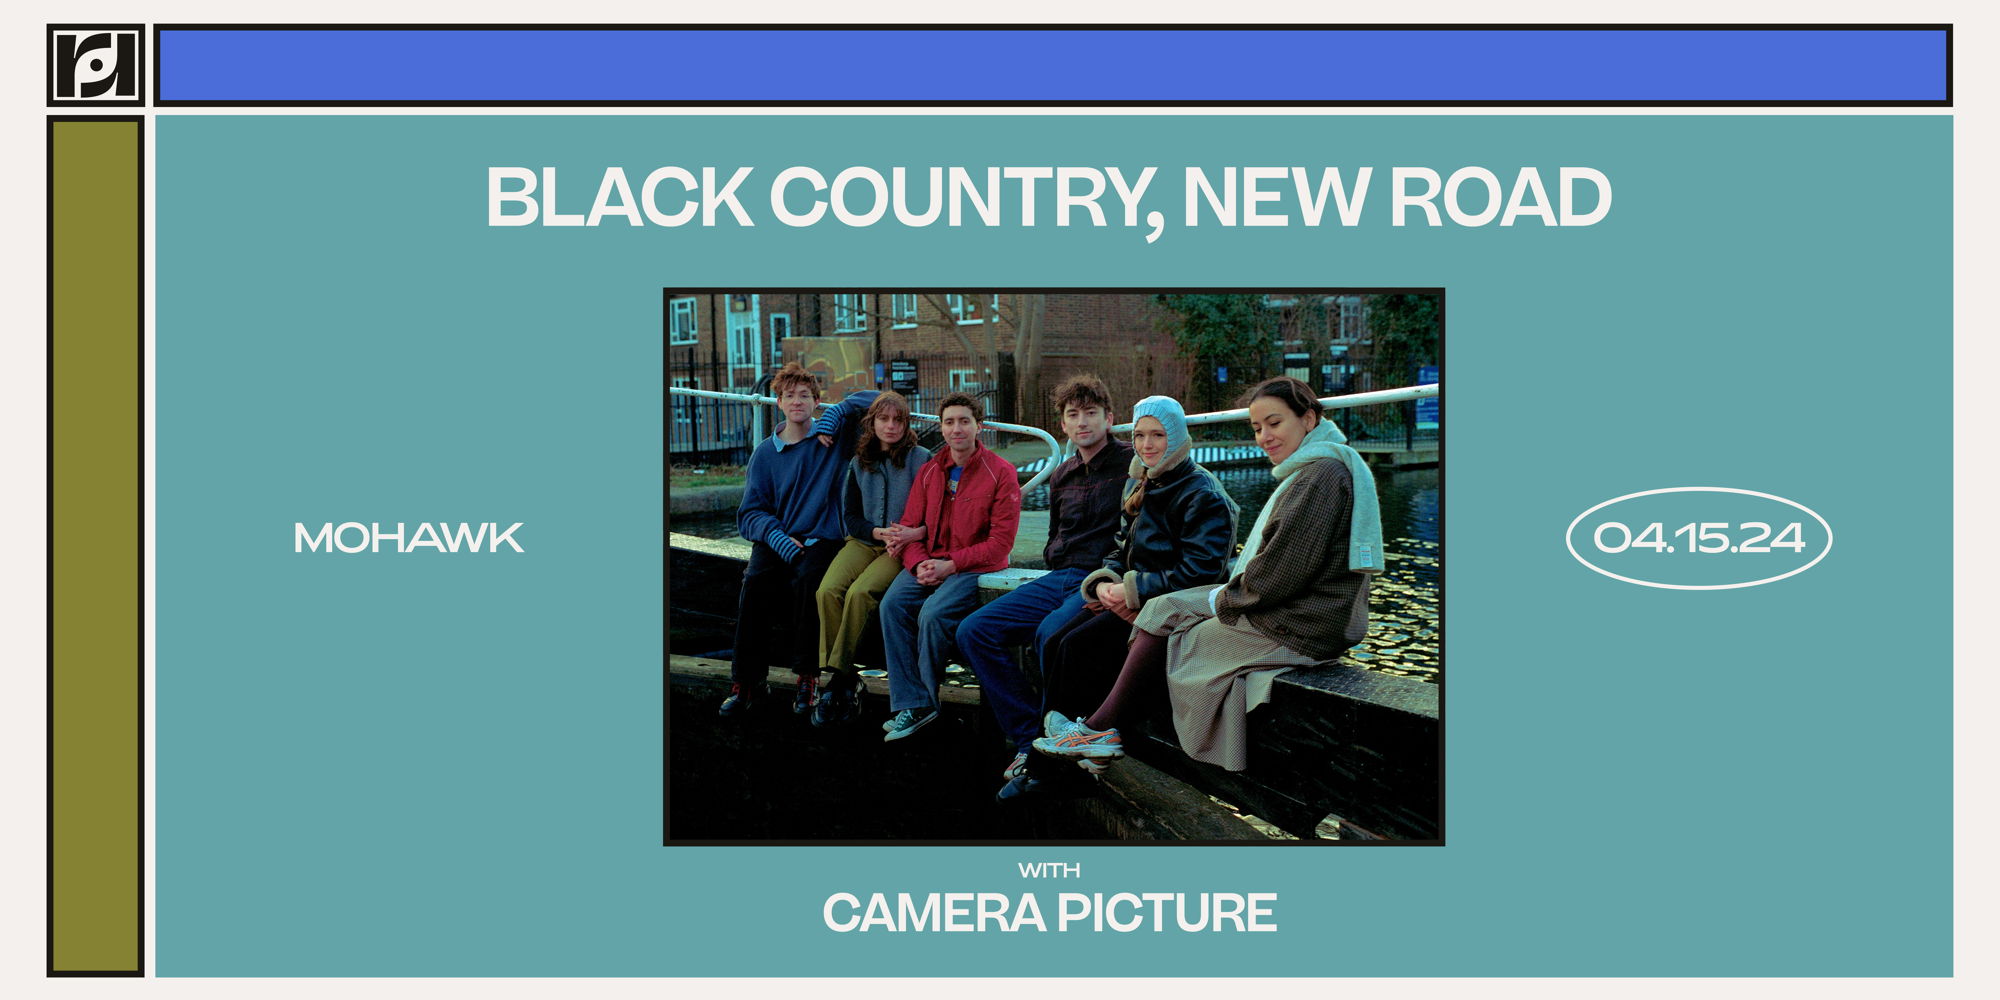 Resound Presents: Black Country, New Road w/ Camera Picture at Mohawk promotional image